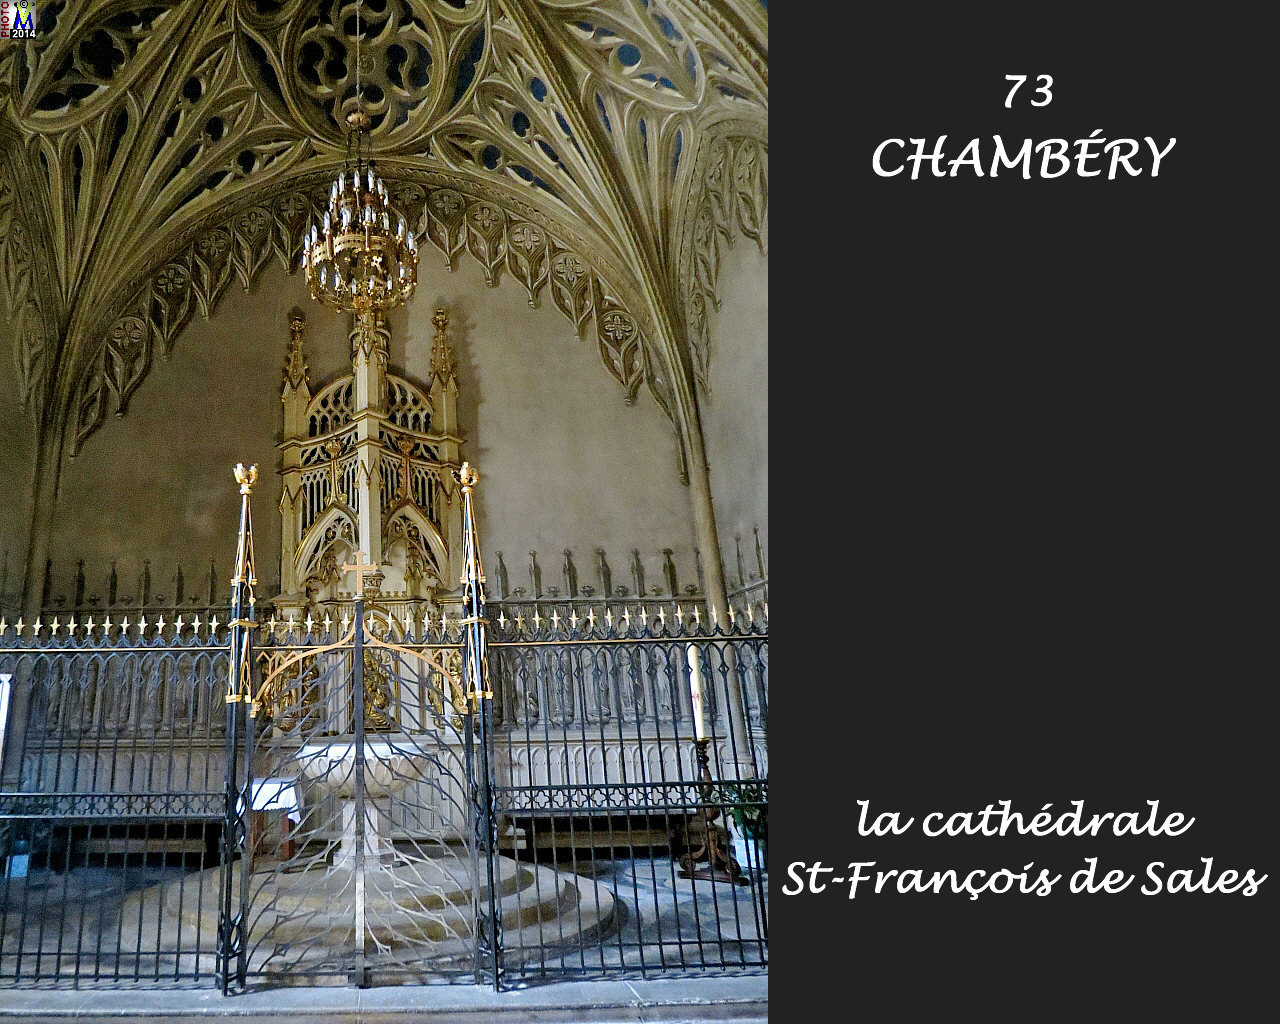 73CHAMBERY_cathedrale_220.jpg